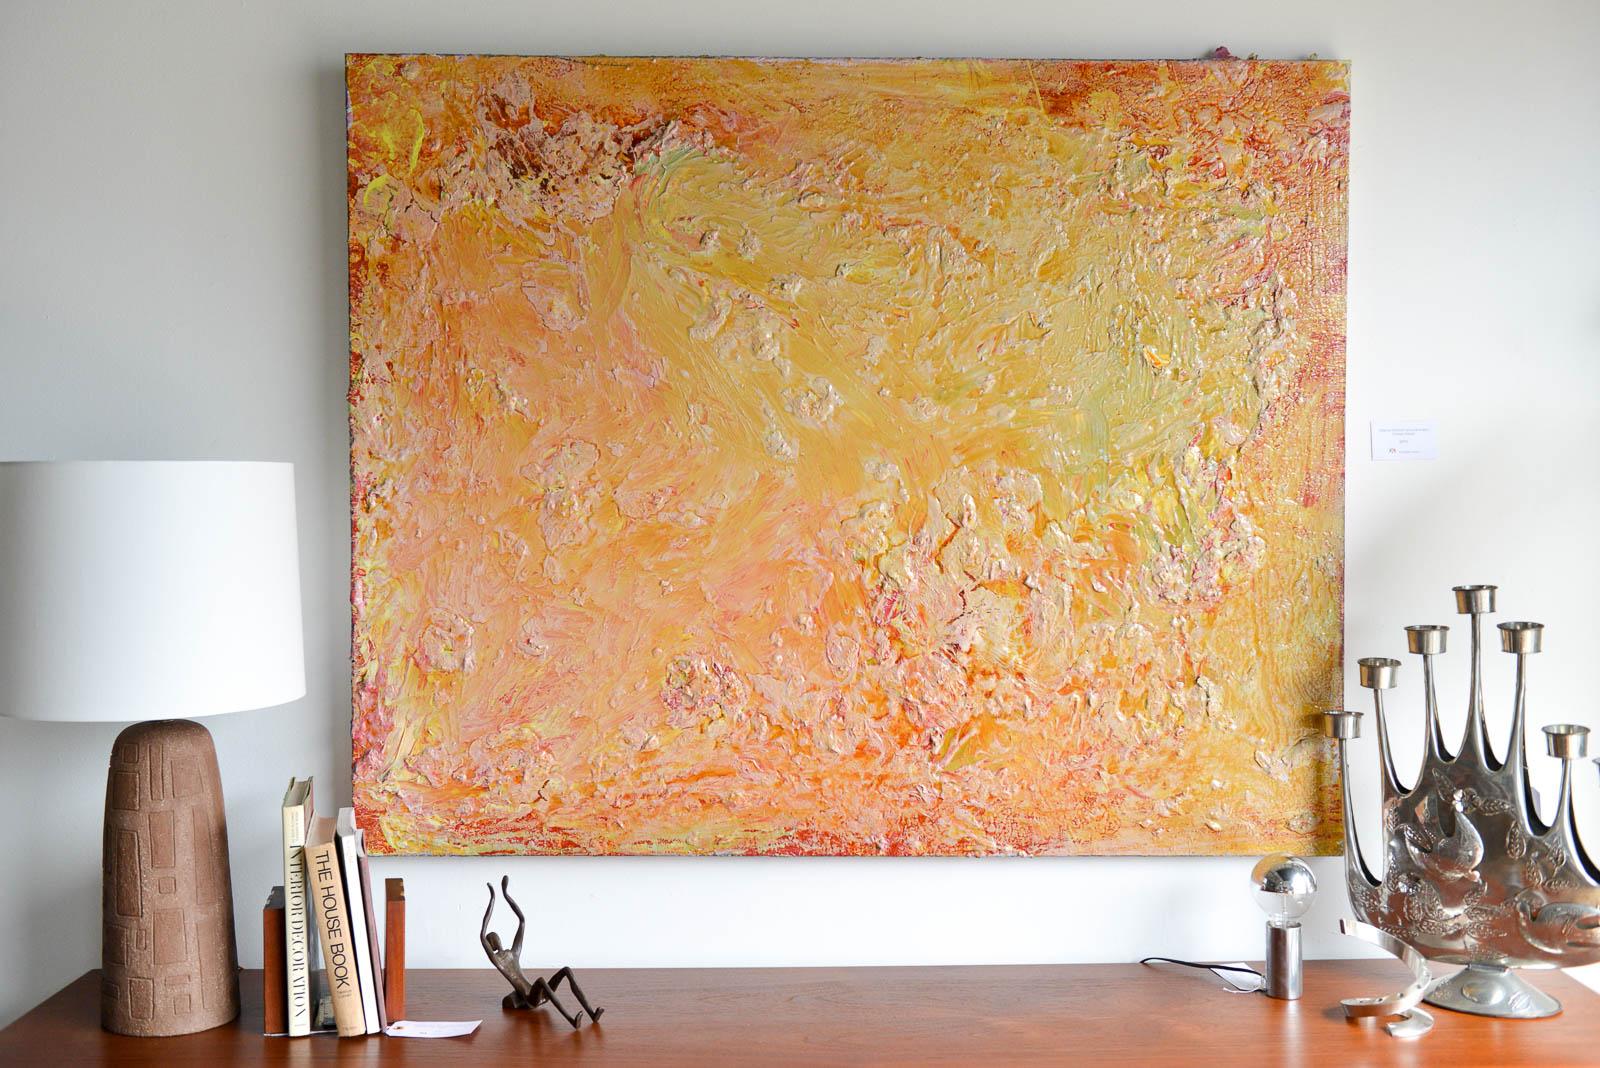 Large original abstract painting on canvas by Brandon Charles Weber. Signed by the artist on reverse, this beautiful piece is an original work and works well with Mid-Century Modern, modern and contemporary decor. Unframed and signed.

Measures